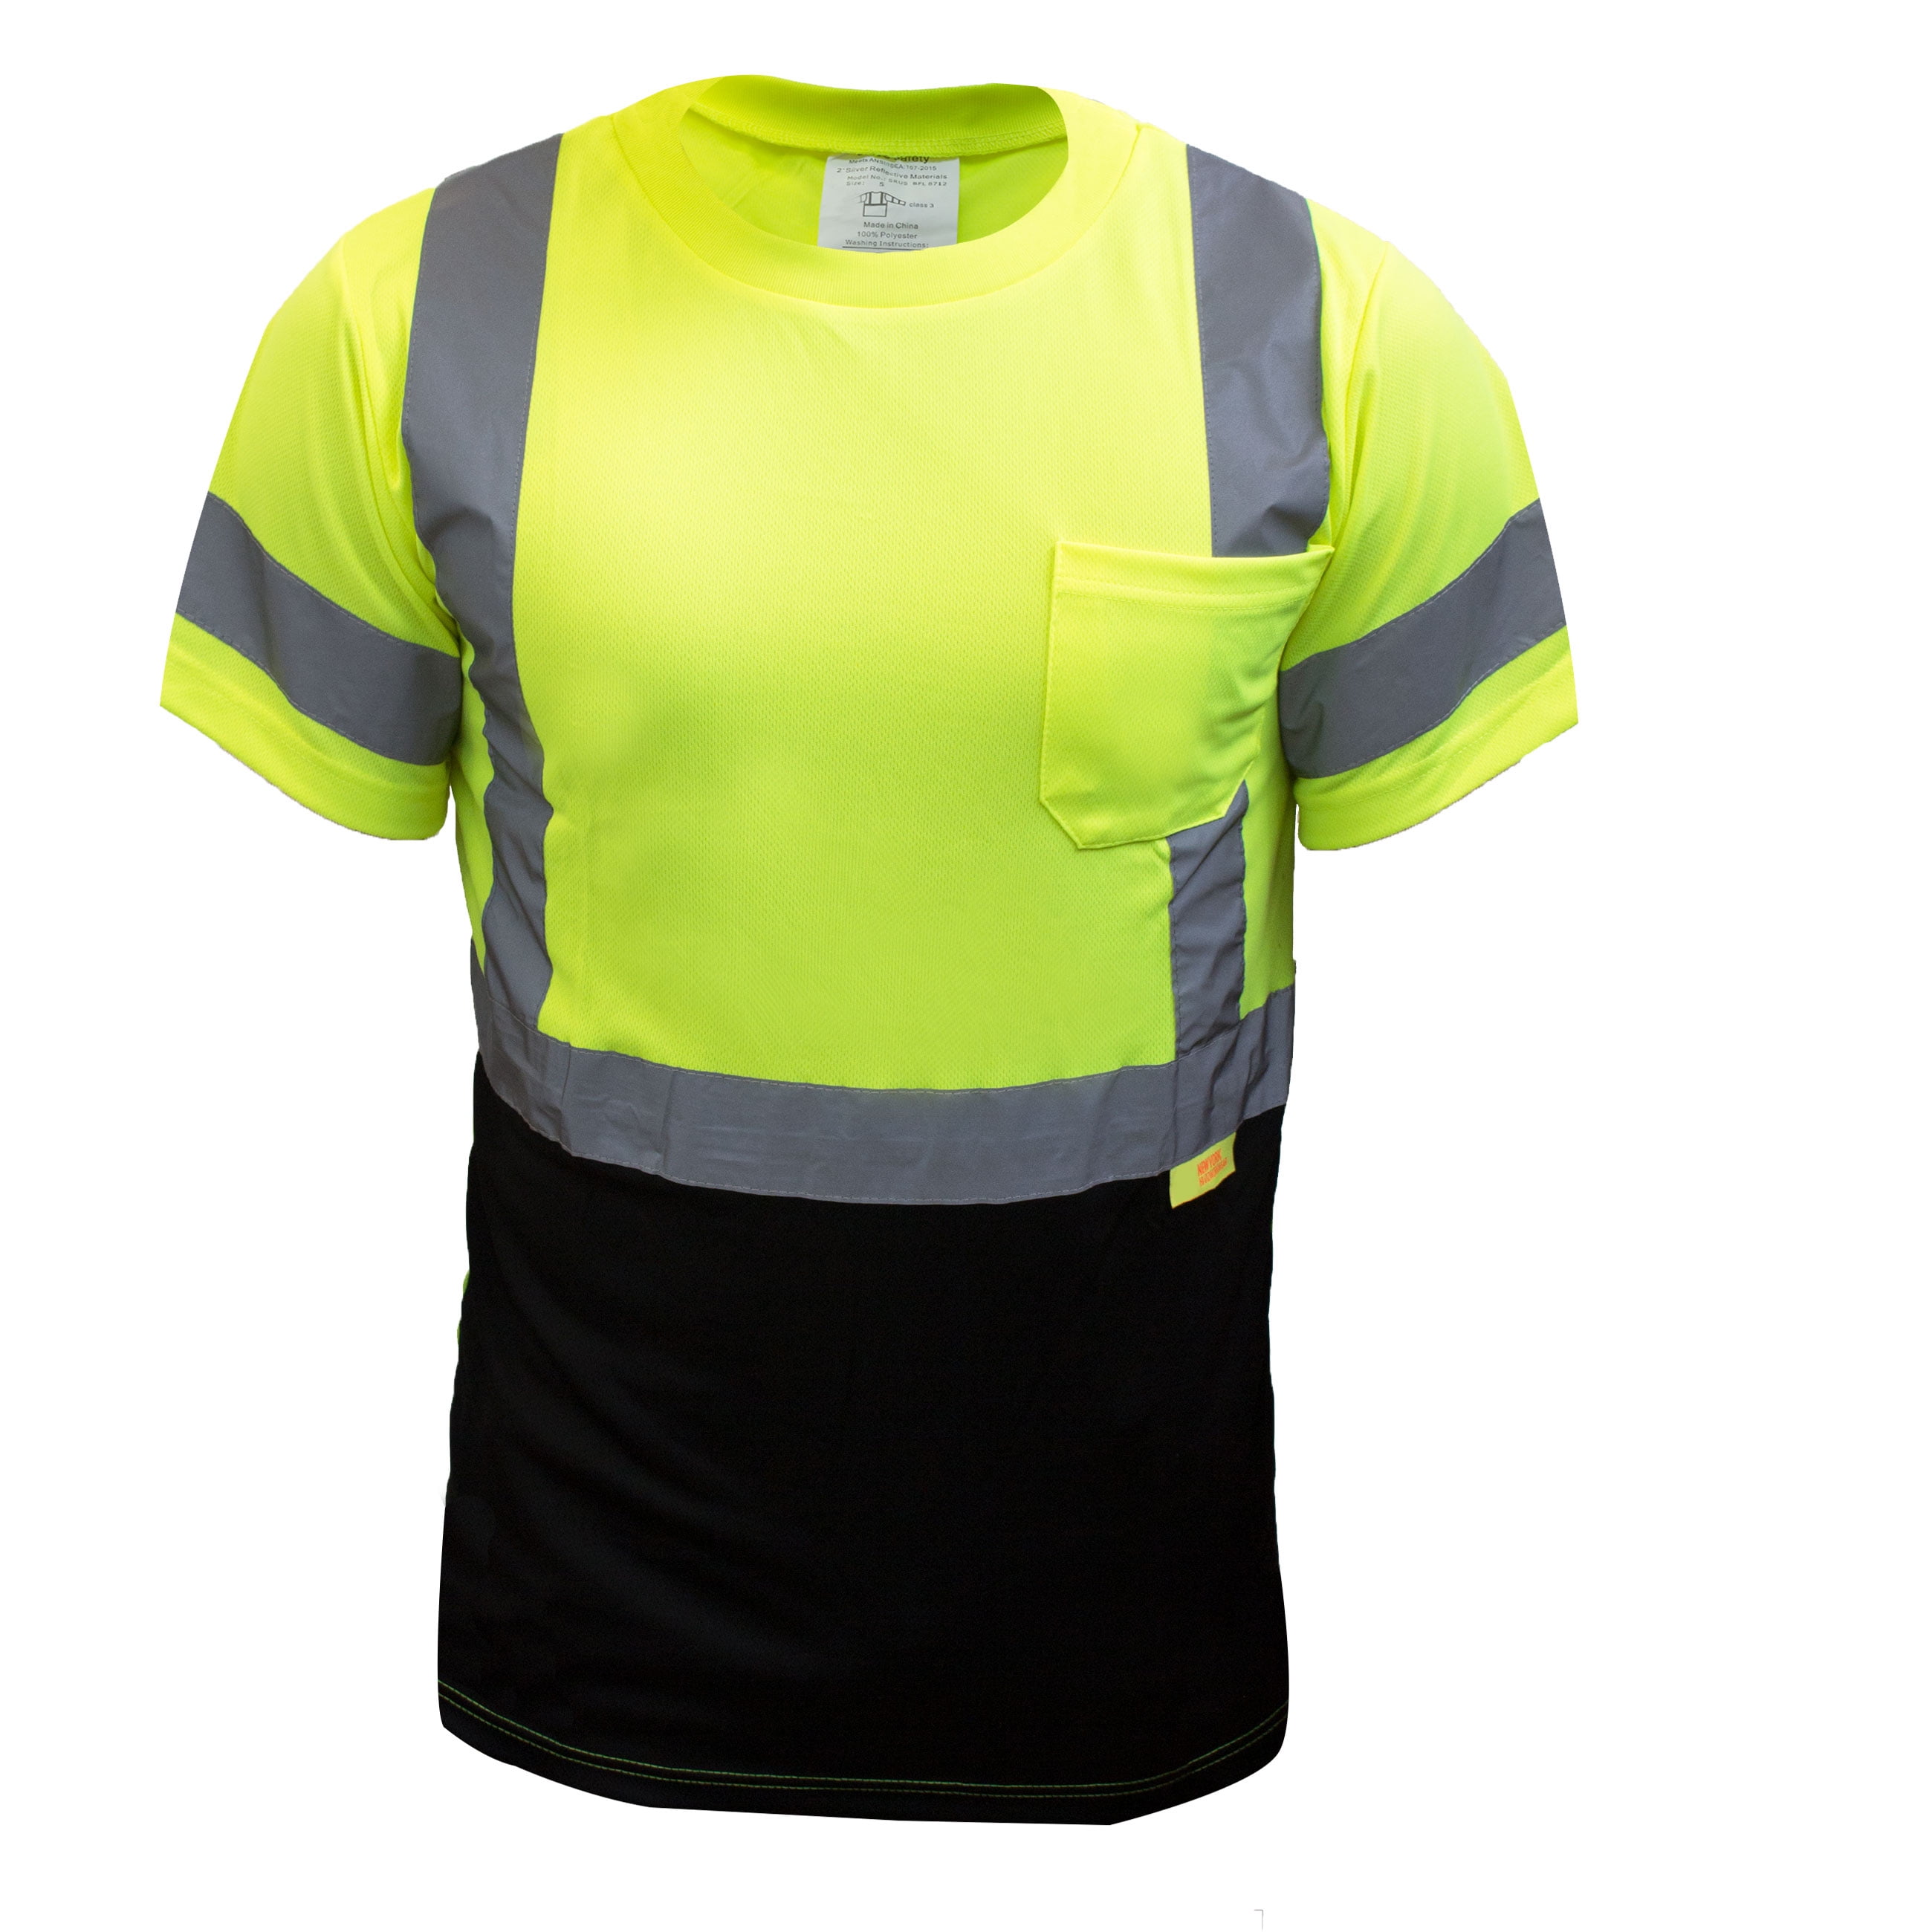 NY BFS8512 High-Visibility Class 3 T Shirt with Moisture Wicking Mesh Birdsey... 